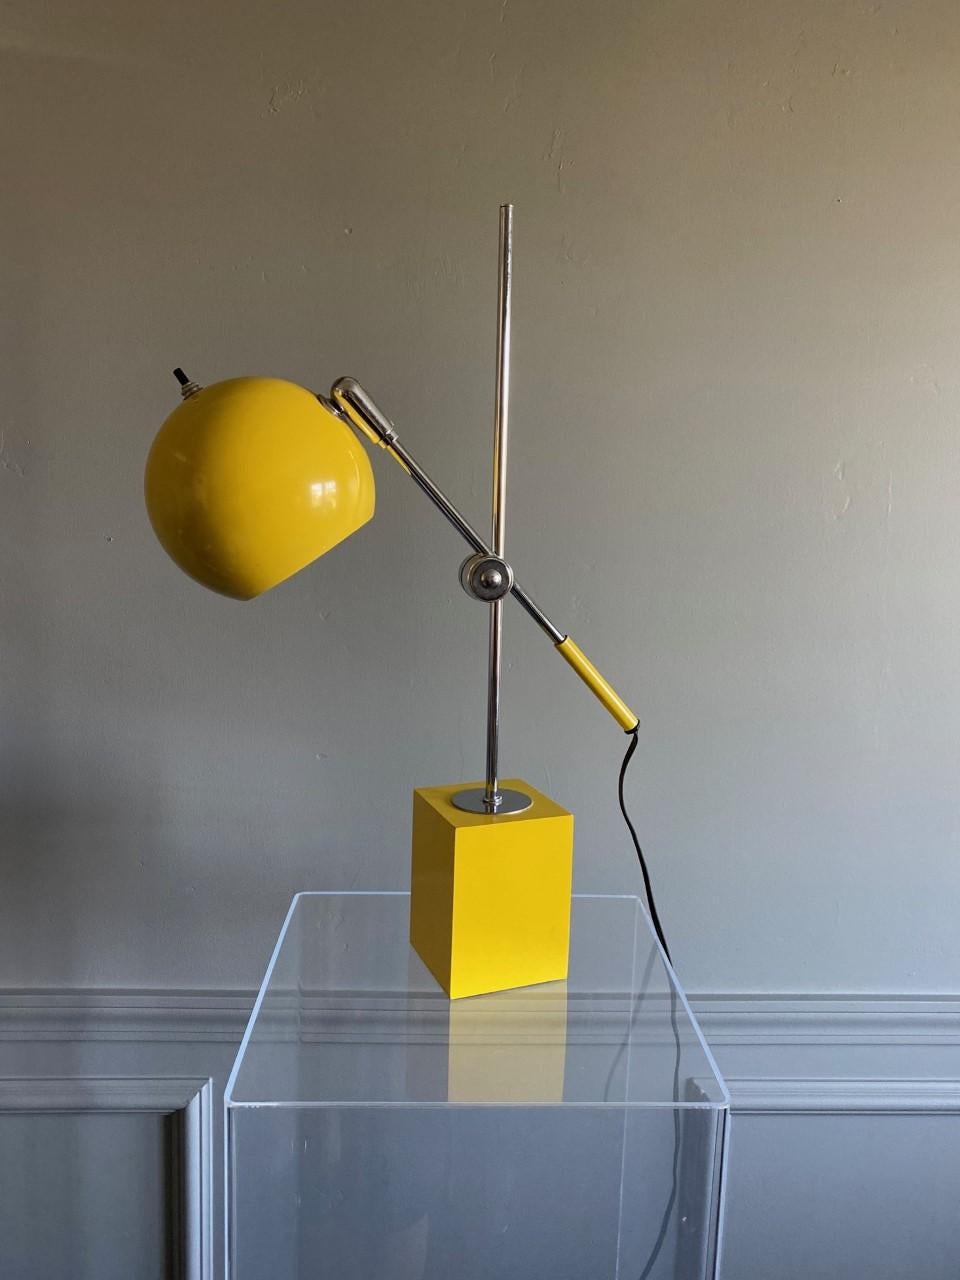 This original midcentury table lamp works with an adjustable arm and adjustable orb head supported on a steel rod that is firmly grounded on a square base. The bright yellow color adds to its cool factor. A true vintage piece that is timeless.